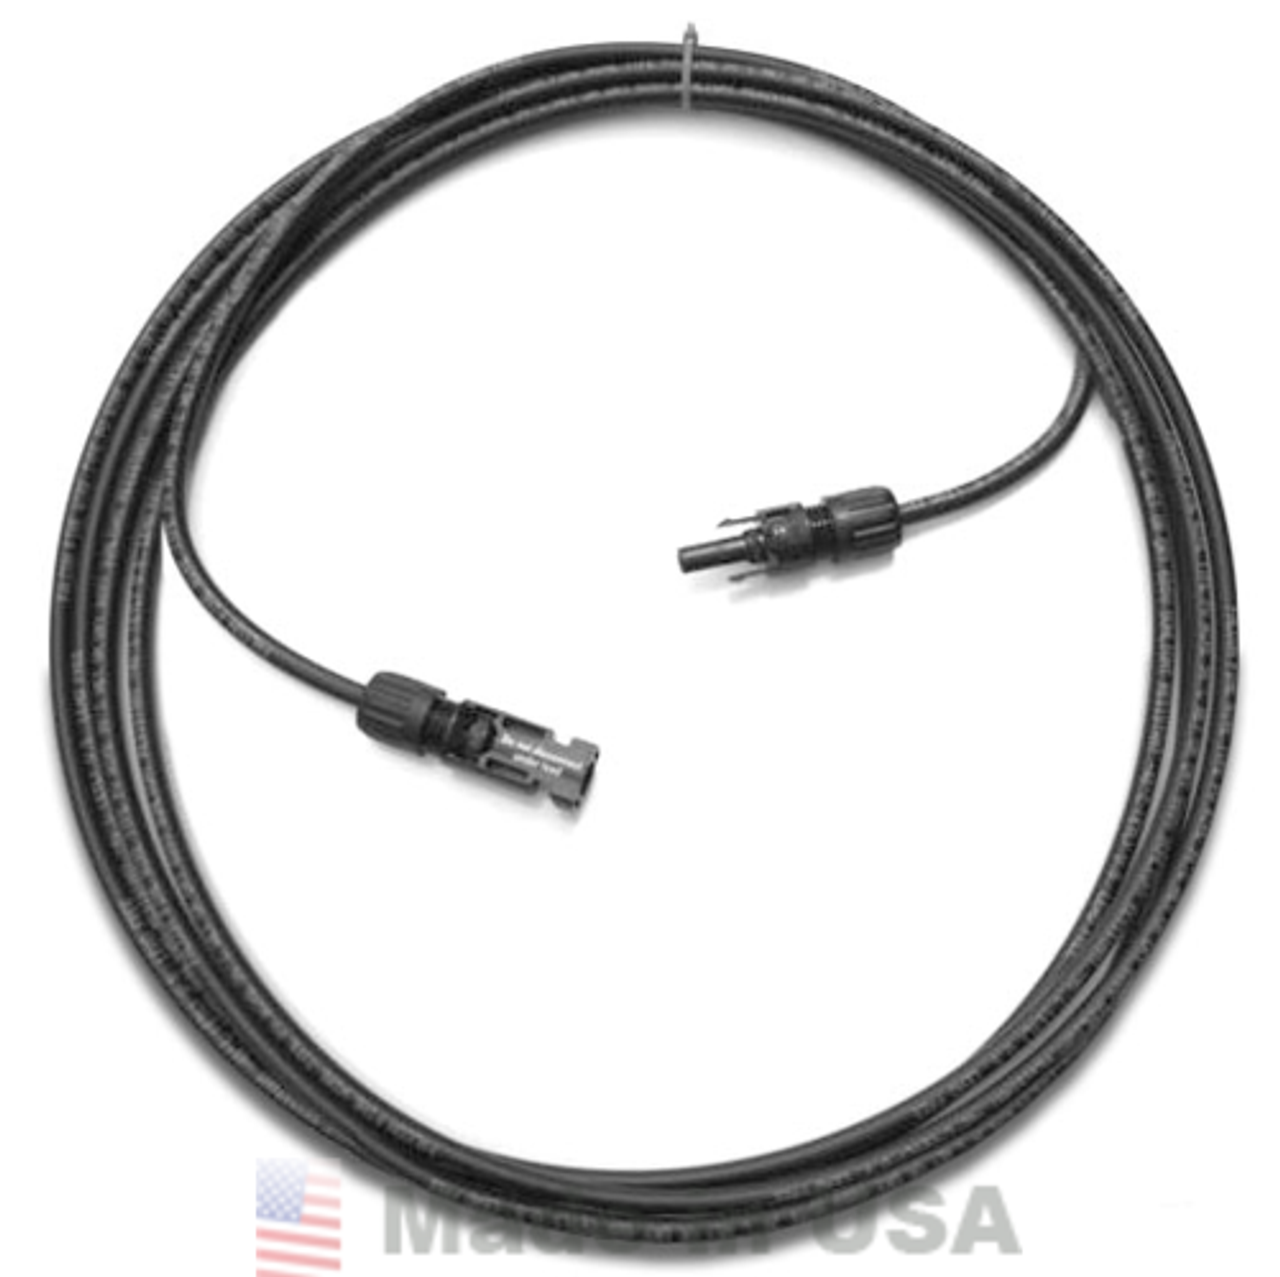 Multi-Contact 150' MC4 Connector Extension #10 AWG